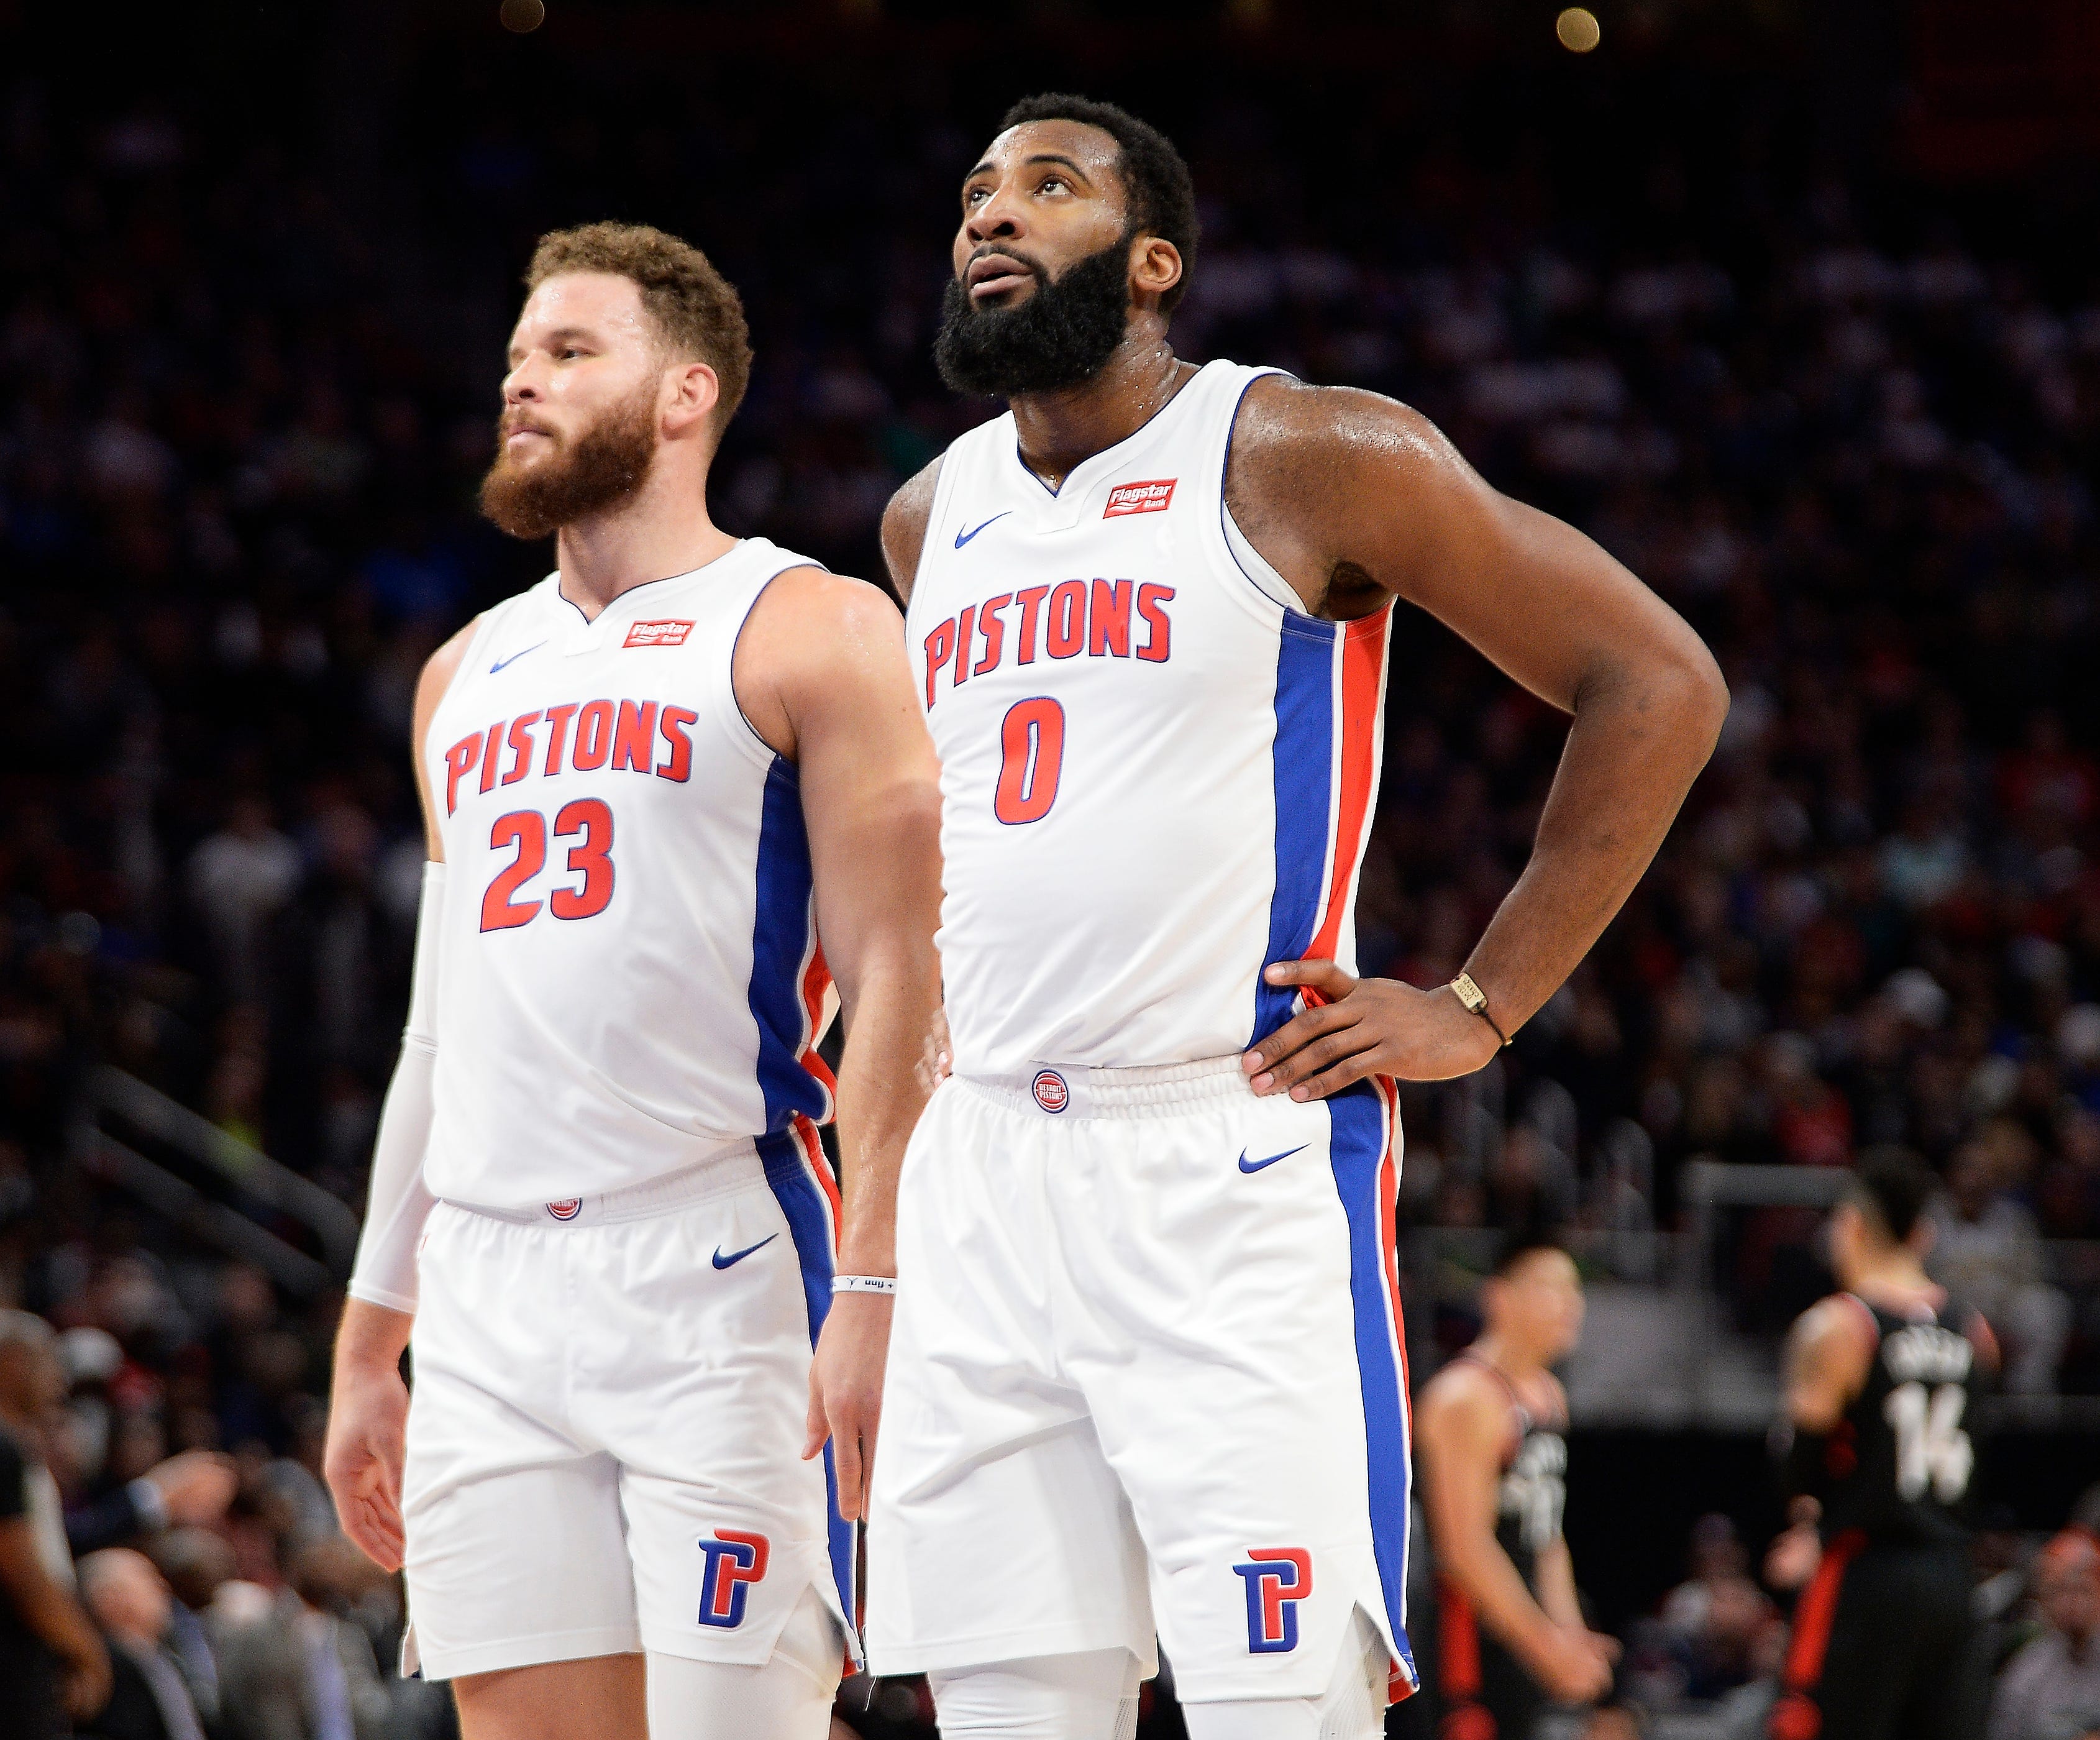 Go through the gallery to meet the 2019-20 Detroit Pistons, with analysis from Rod Beard of The Detroit News.